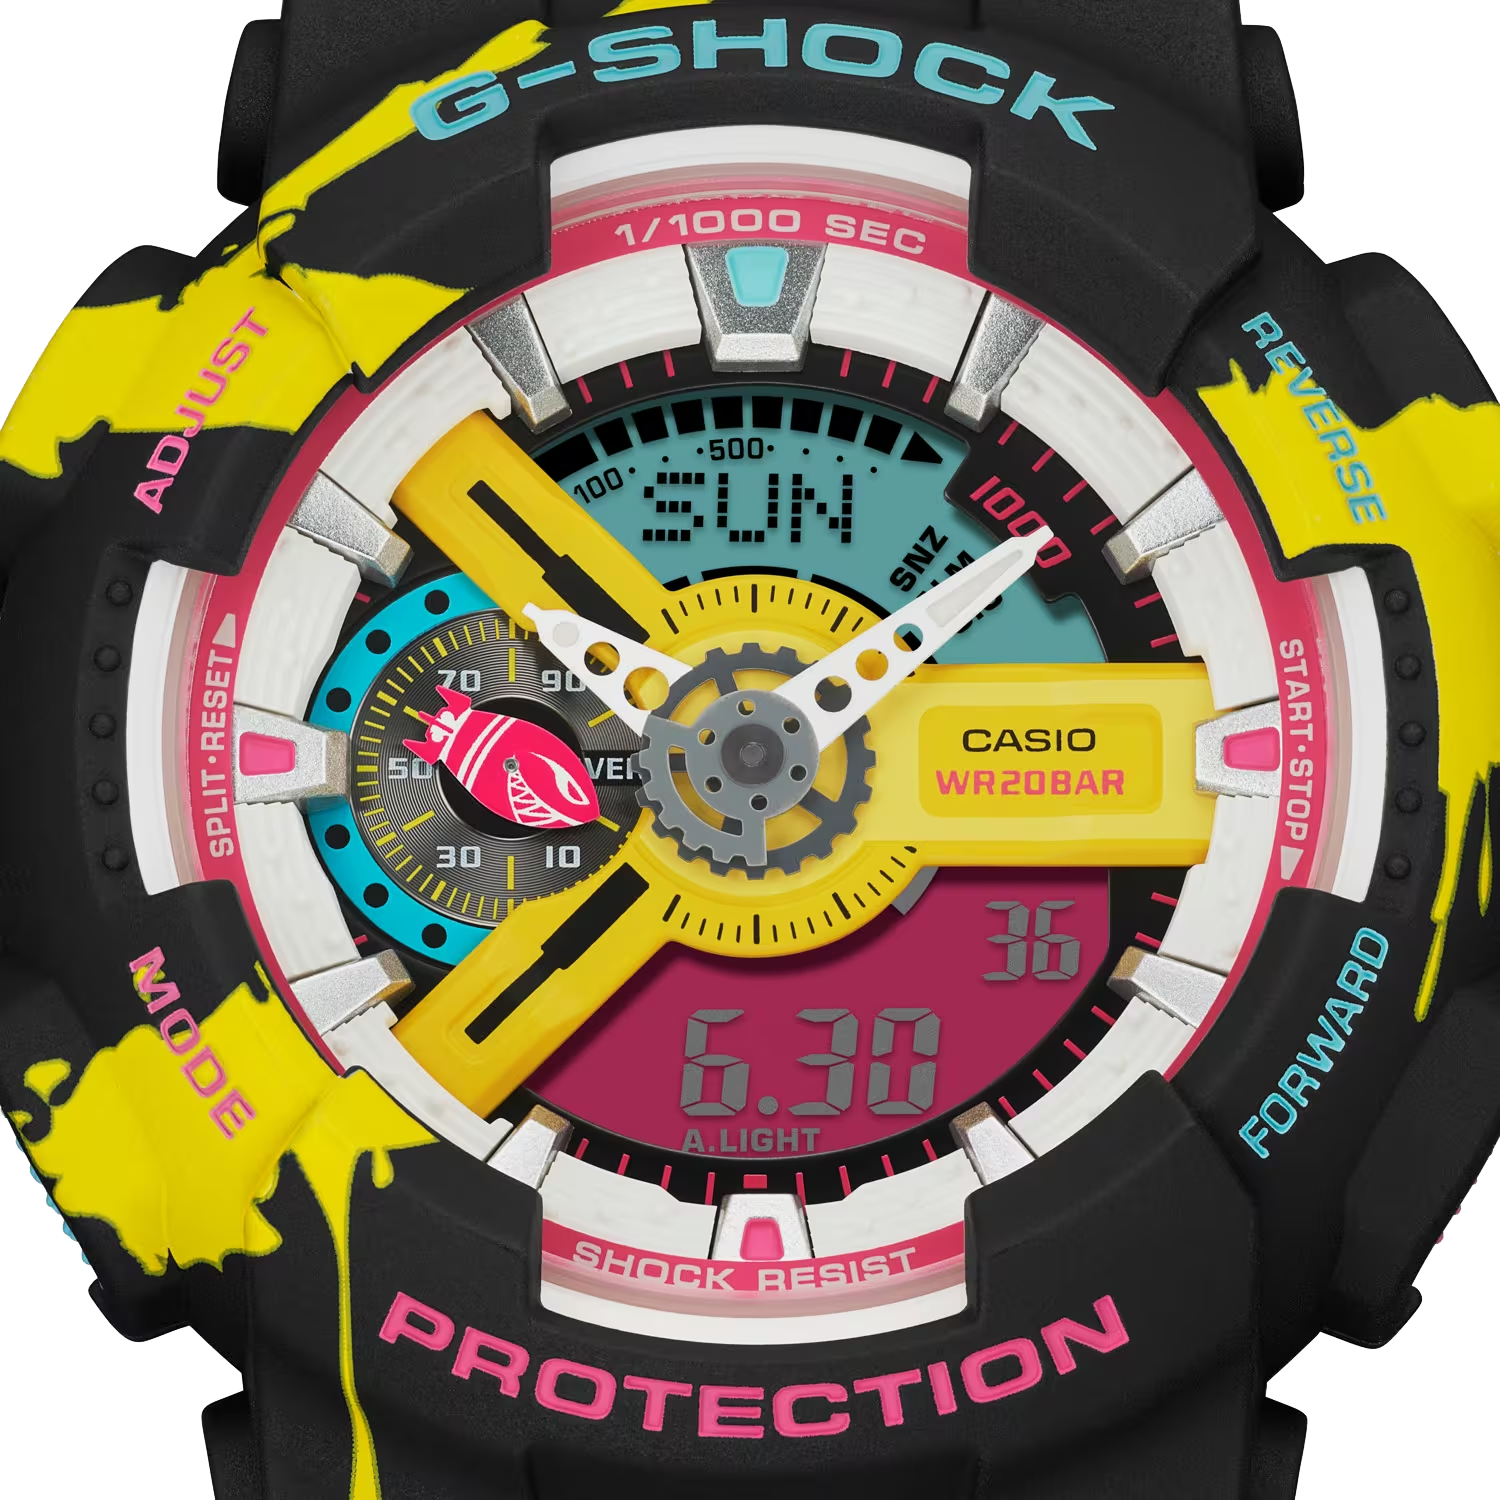 G-SHOCK League of Legends Collaboration Watches